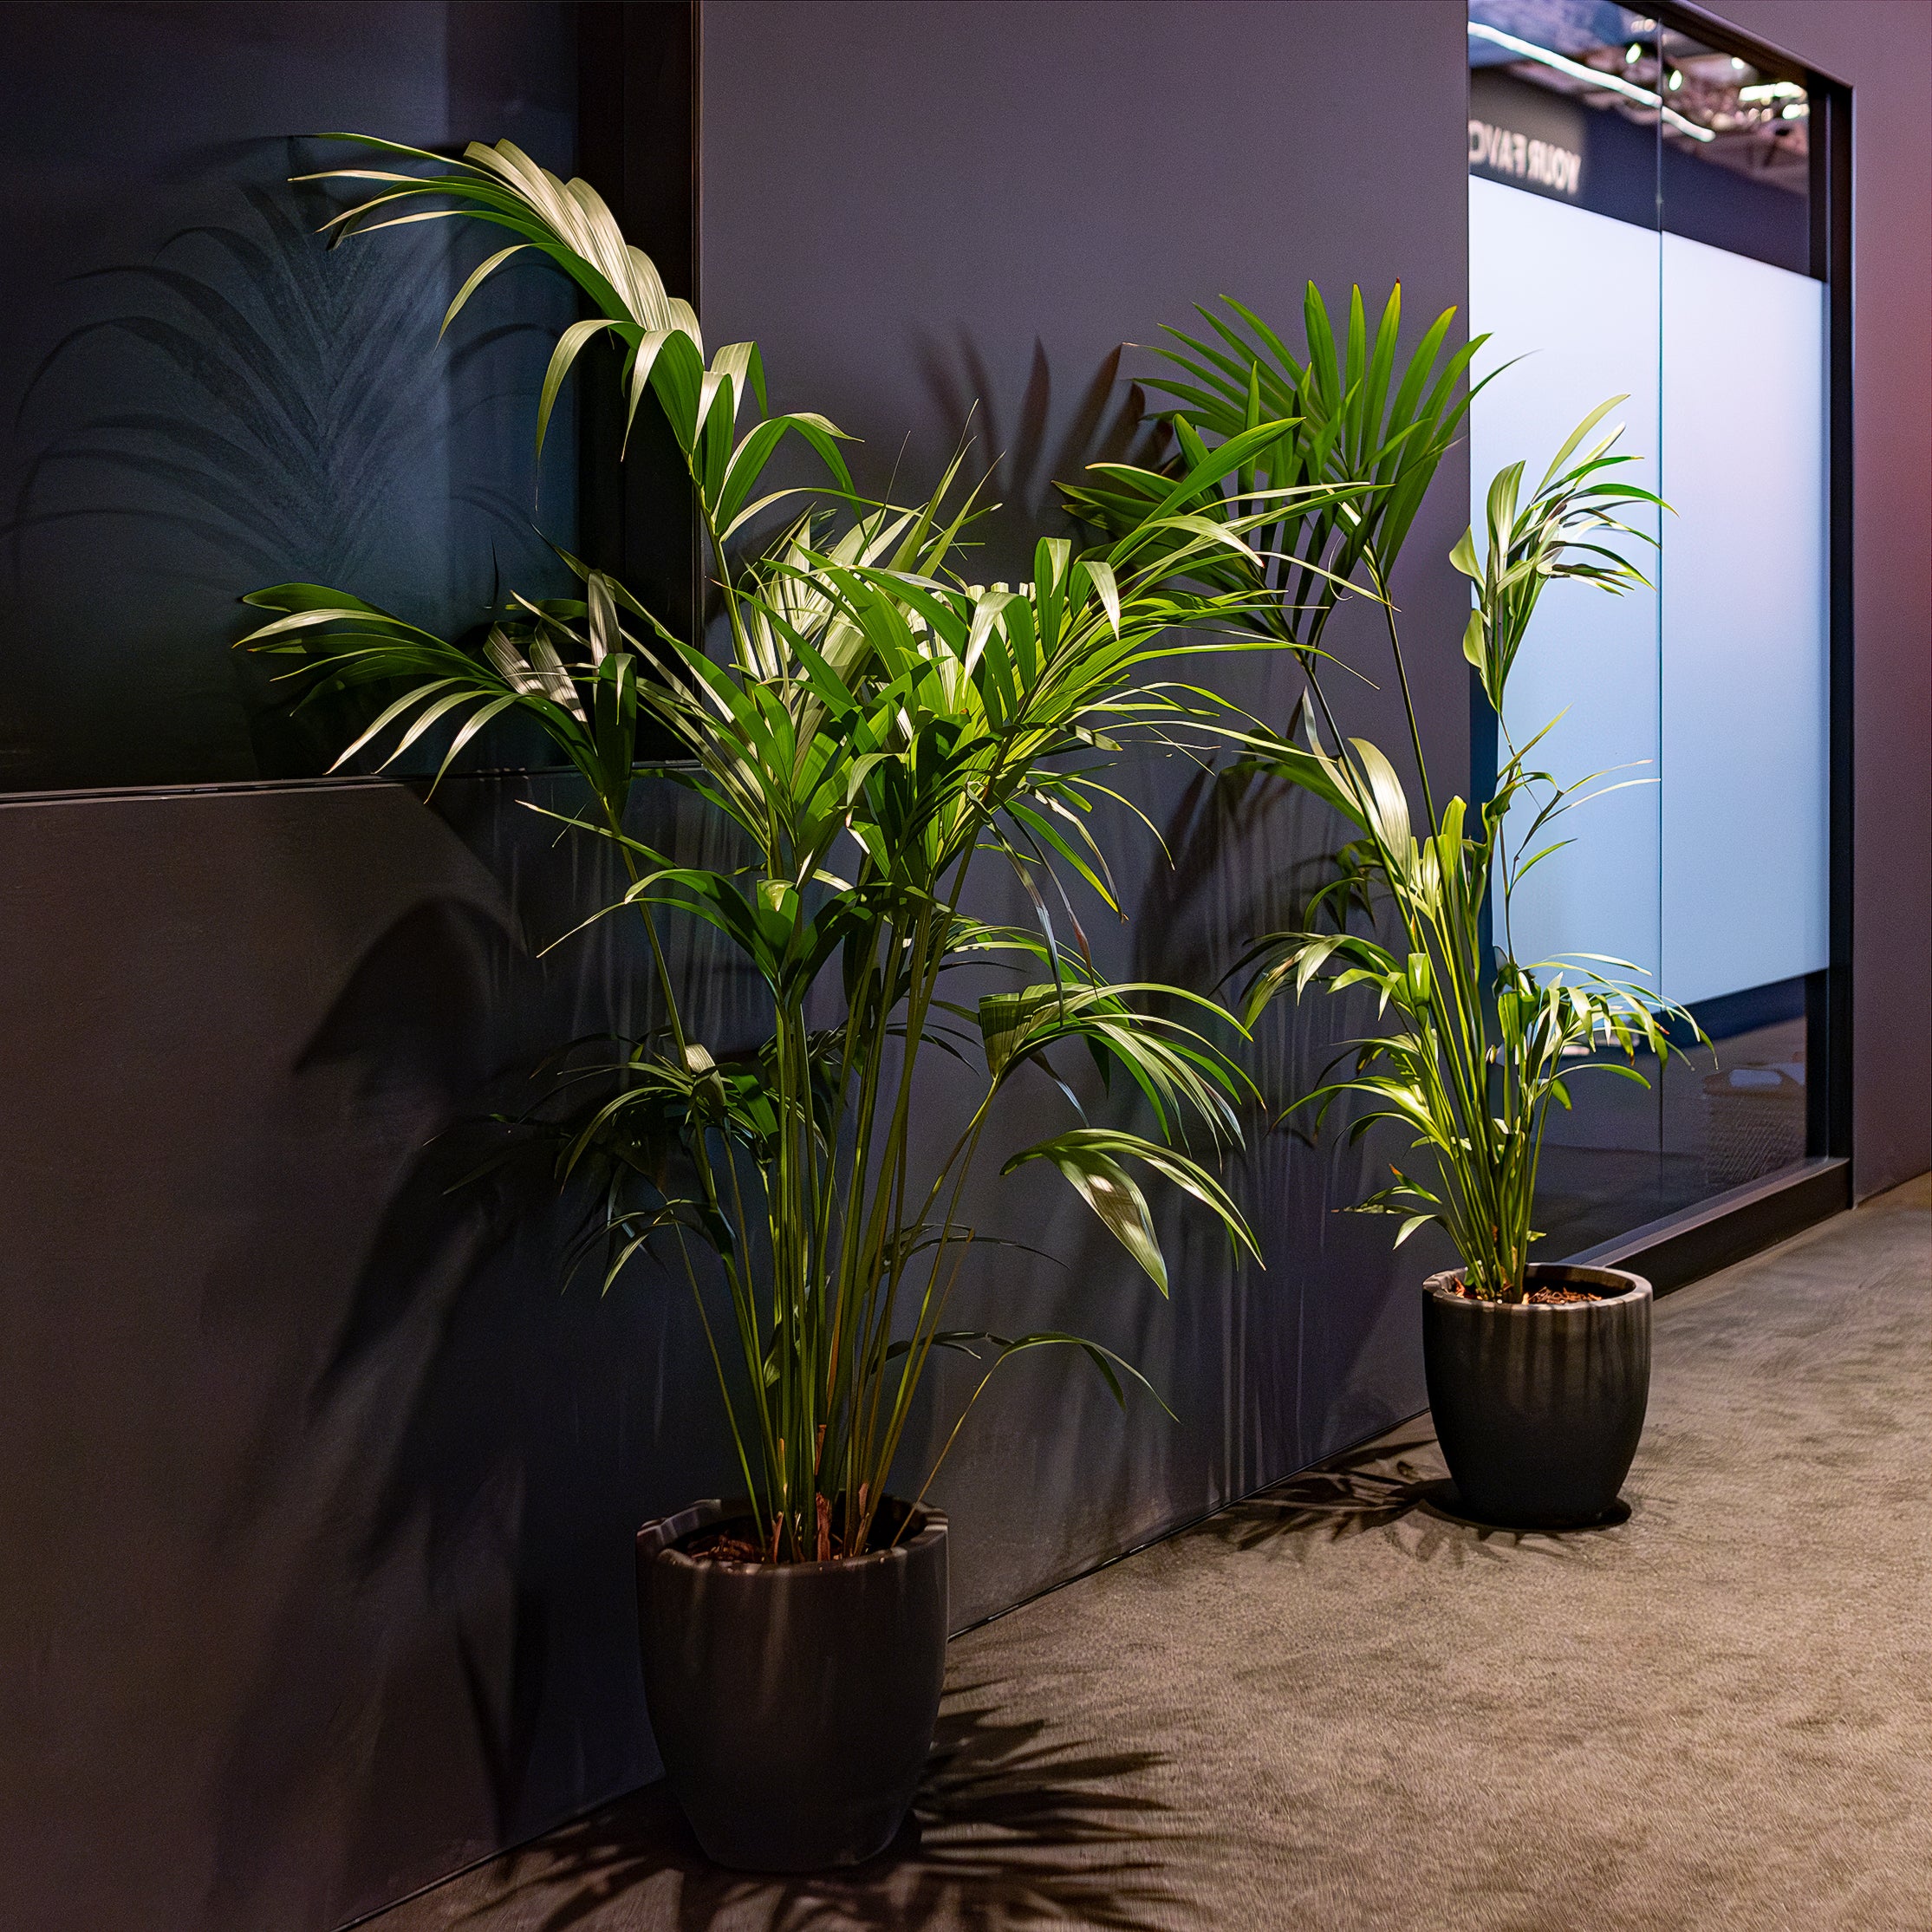 Sophisticated dark planters with vibrant, tall green palms stand against a muted background, designed to prove a natural contrast within the ICE London Exhibition's corporate meeting area.